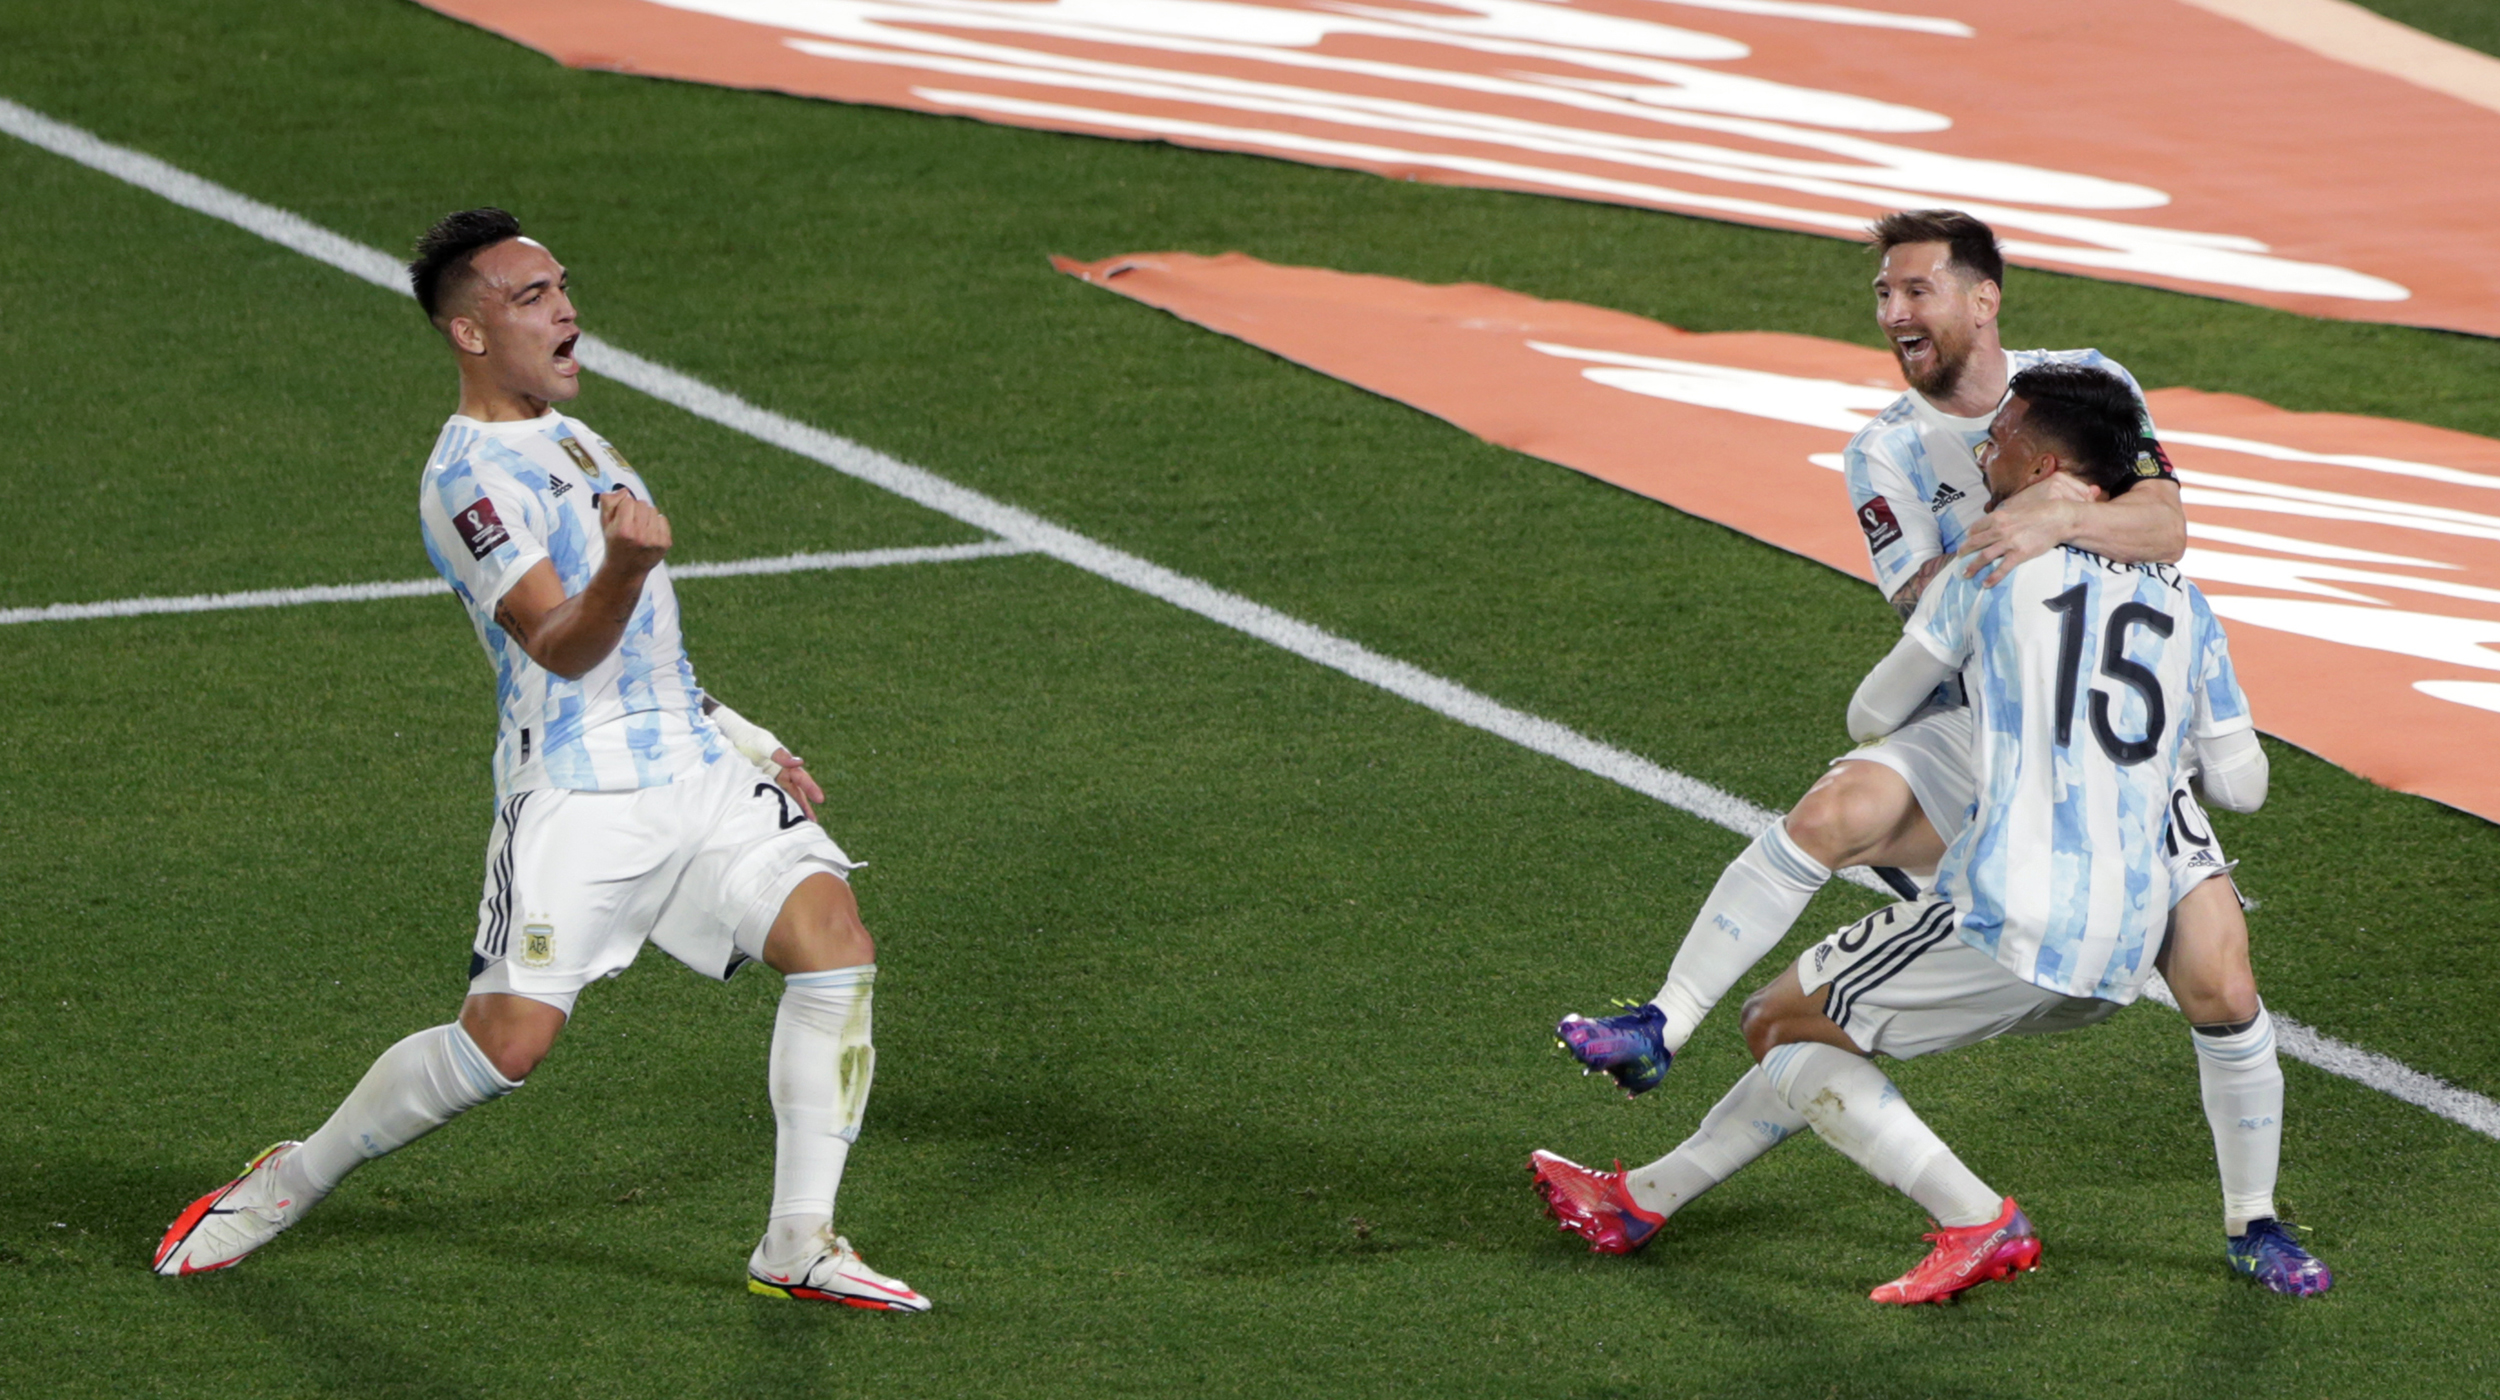 Lionel Messi of Argentina celebrates with teammate Nicolás Gonzalez after scoring the first goal of his team during a match between Argentina and Uruguay as part of South American Qualifiers for Qatar 2022 at Estadio Monumental Antonio Vespucio Liberti on October 10, 2021 in Buenos Aires, Argentina.